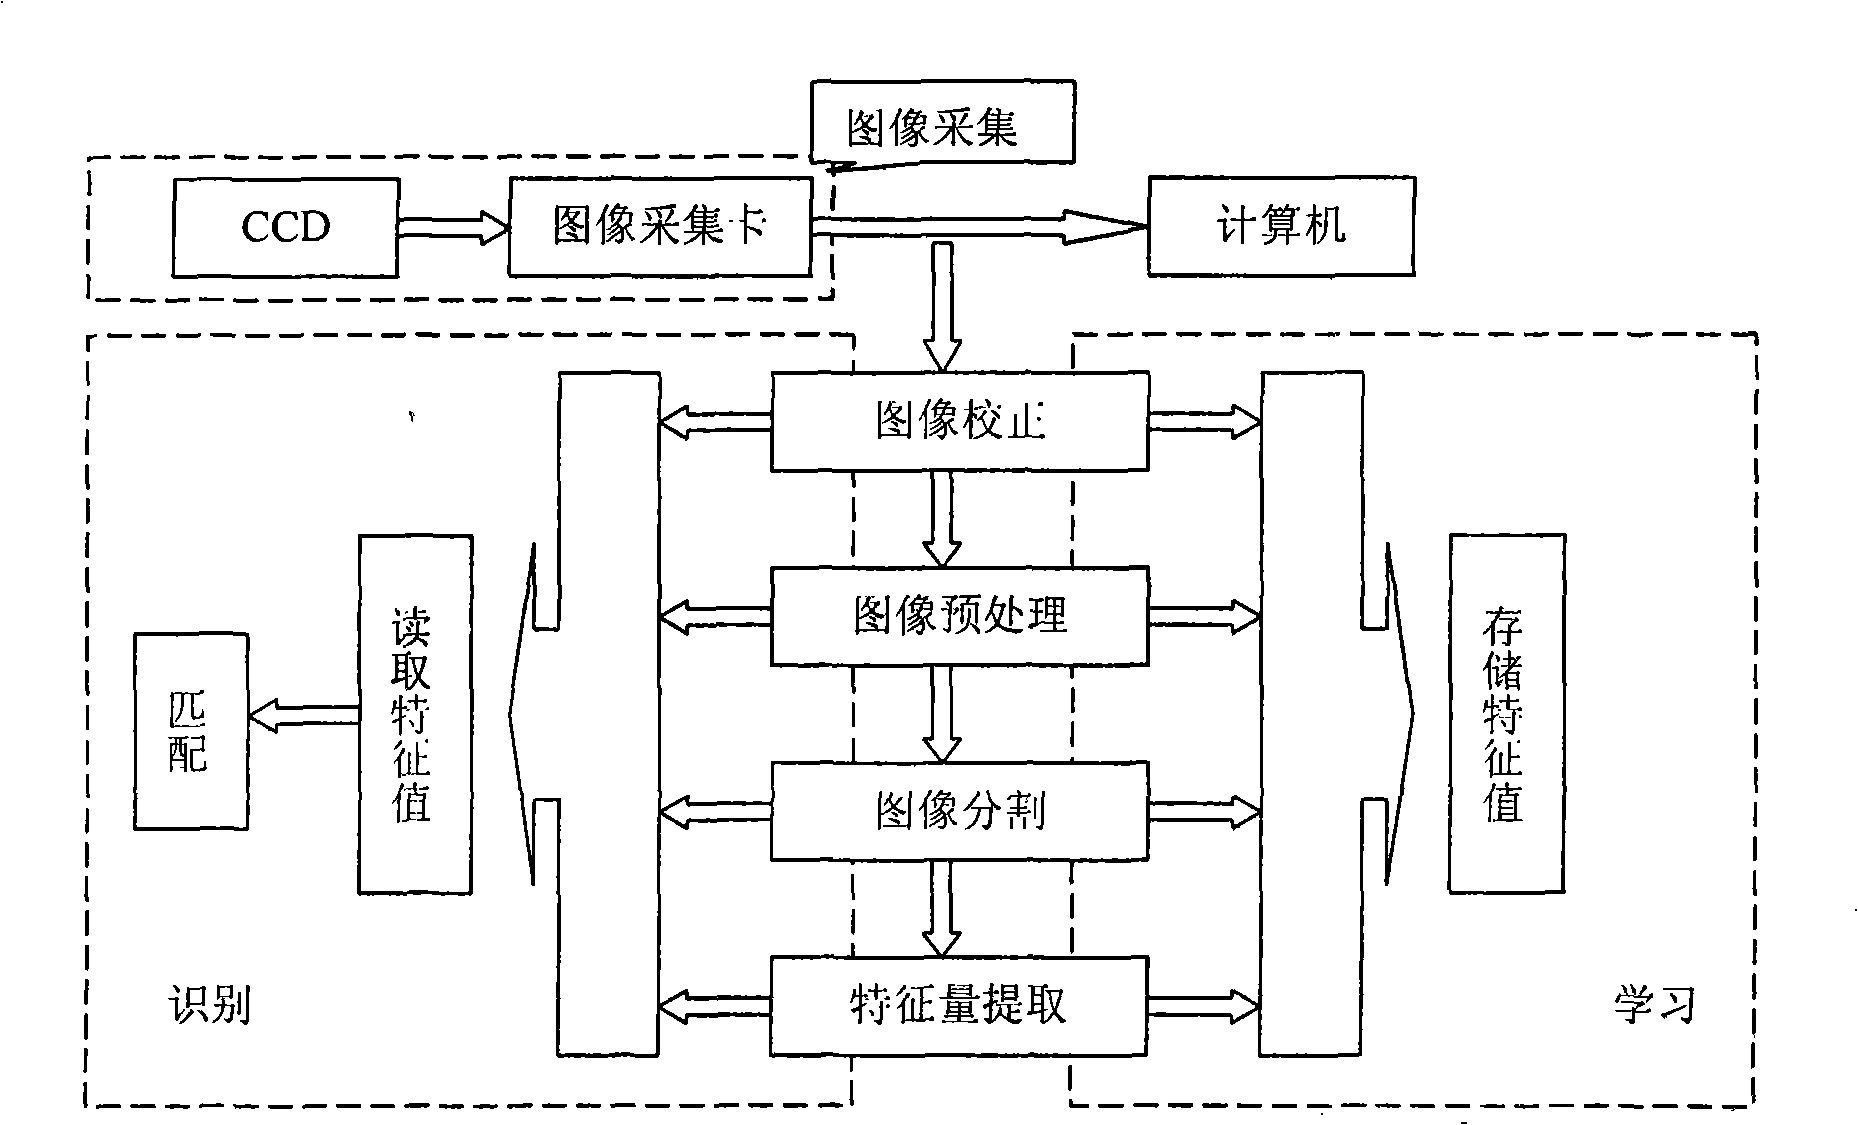 Image processing process of full-automatic lead wire bonding machine image processing system